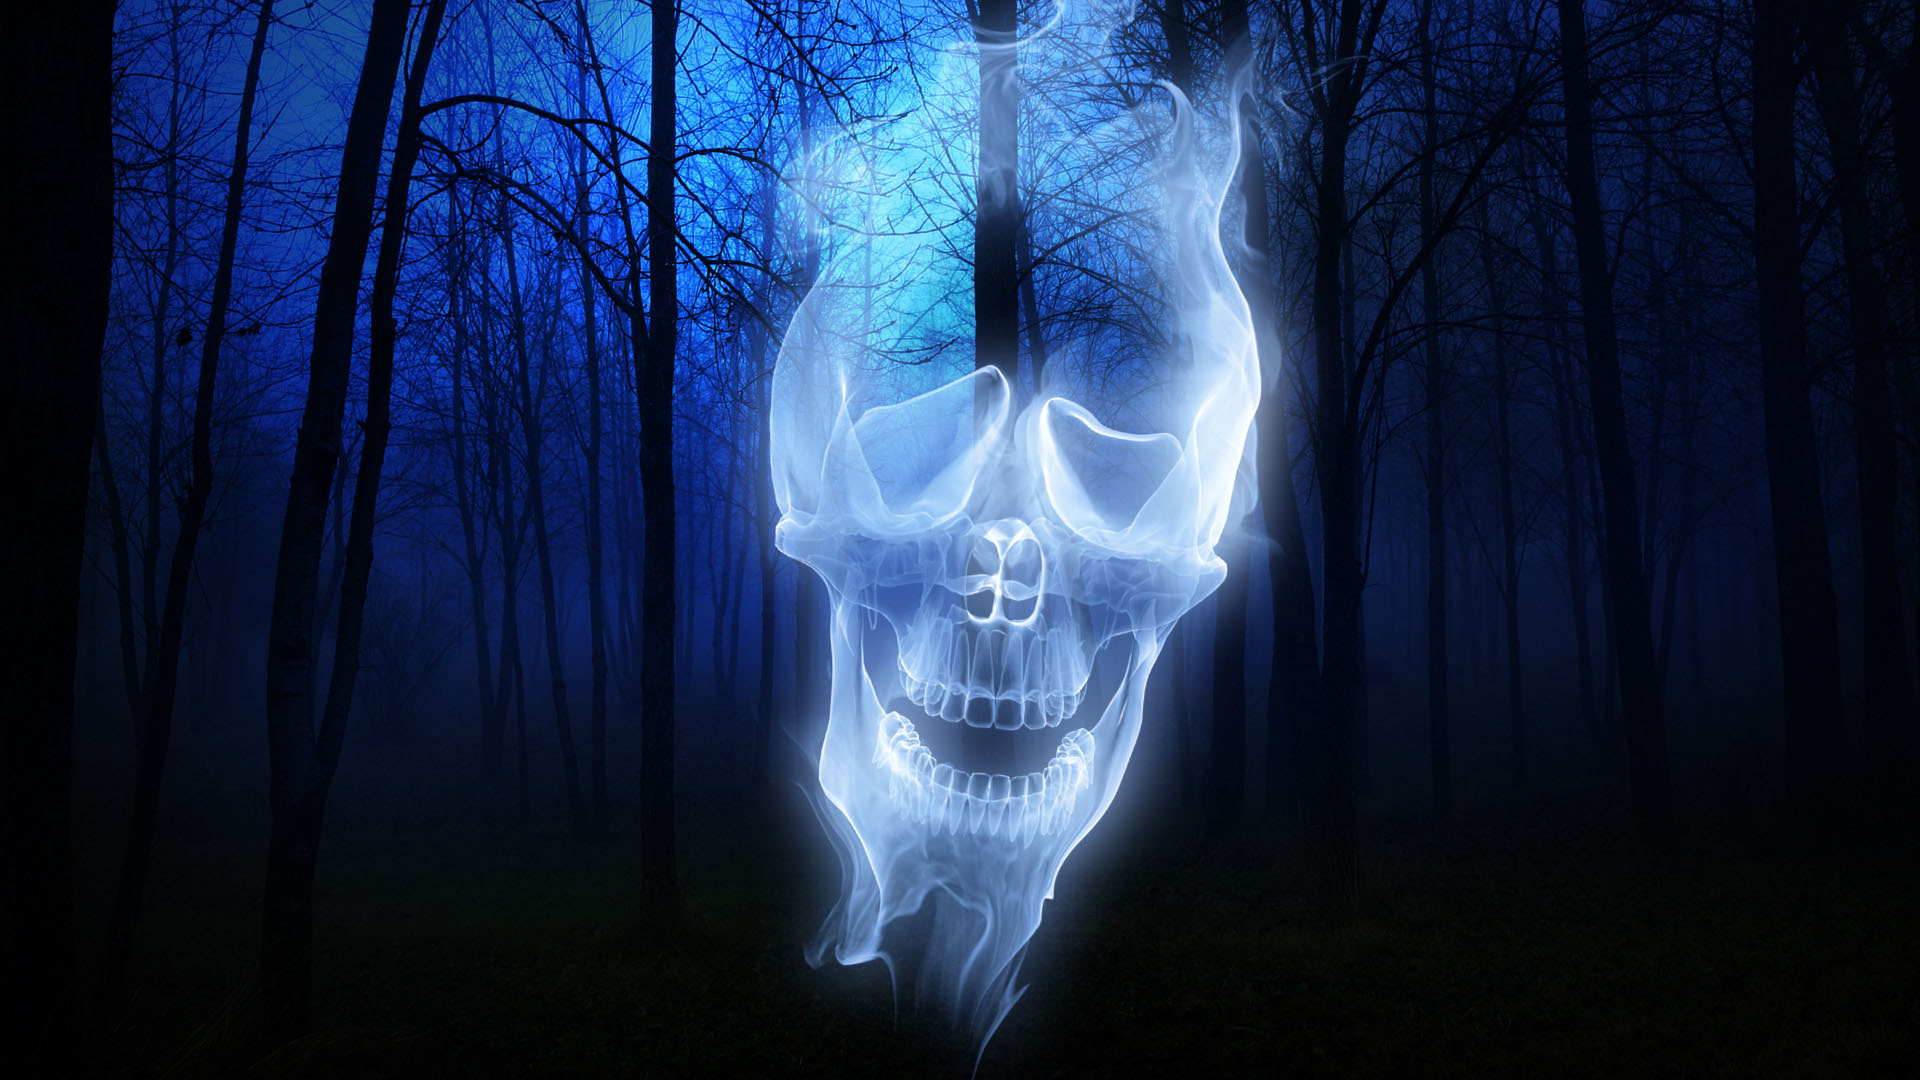 Widescreen image spooky, holiday, halloween, forest